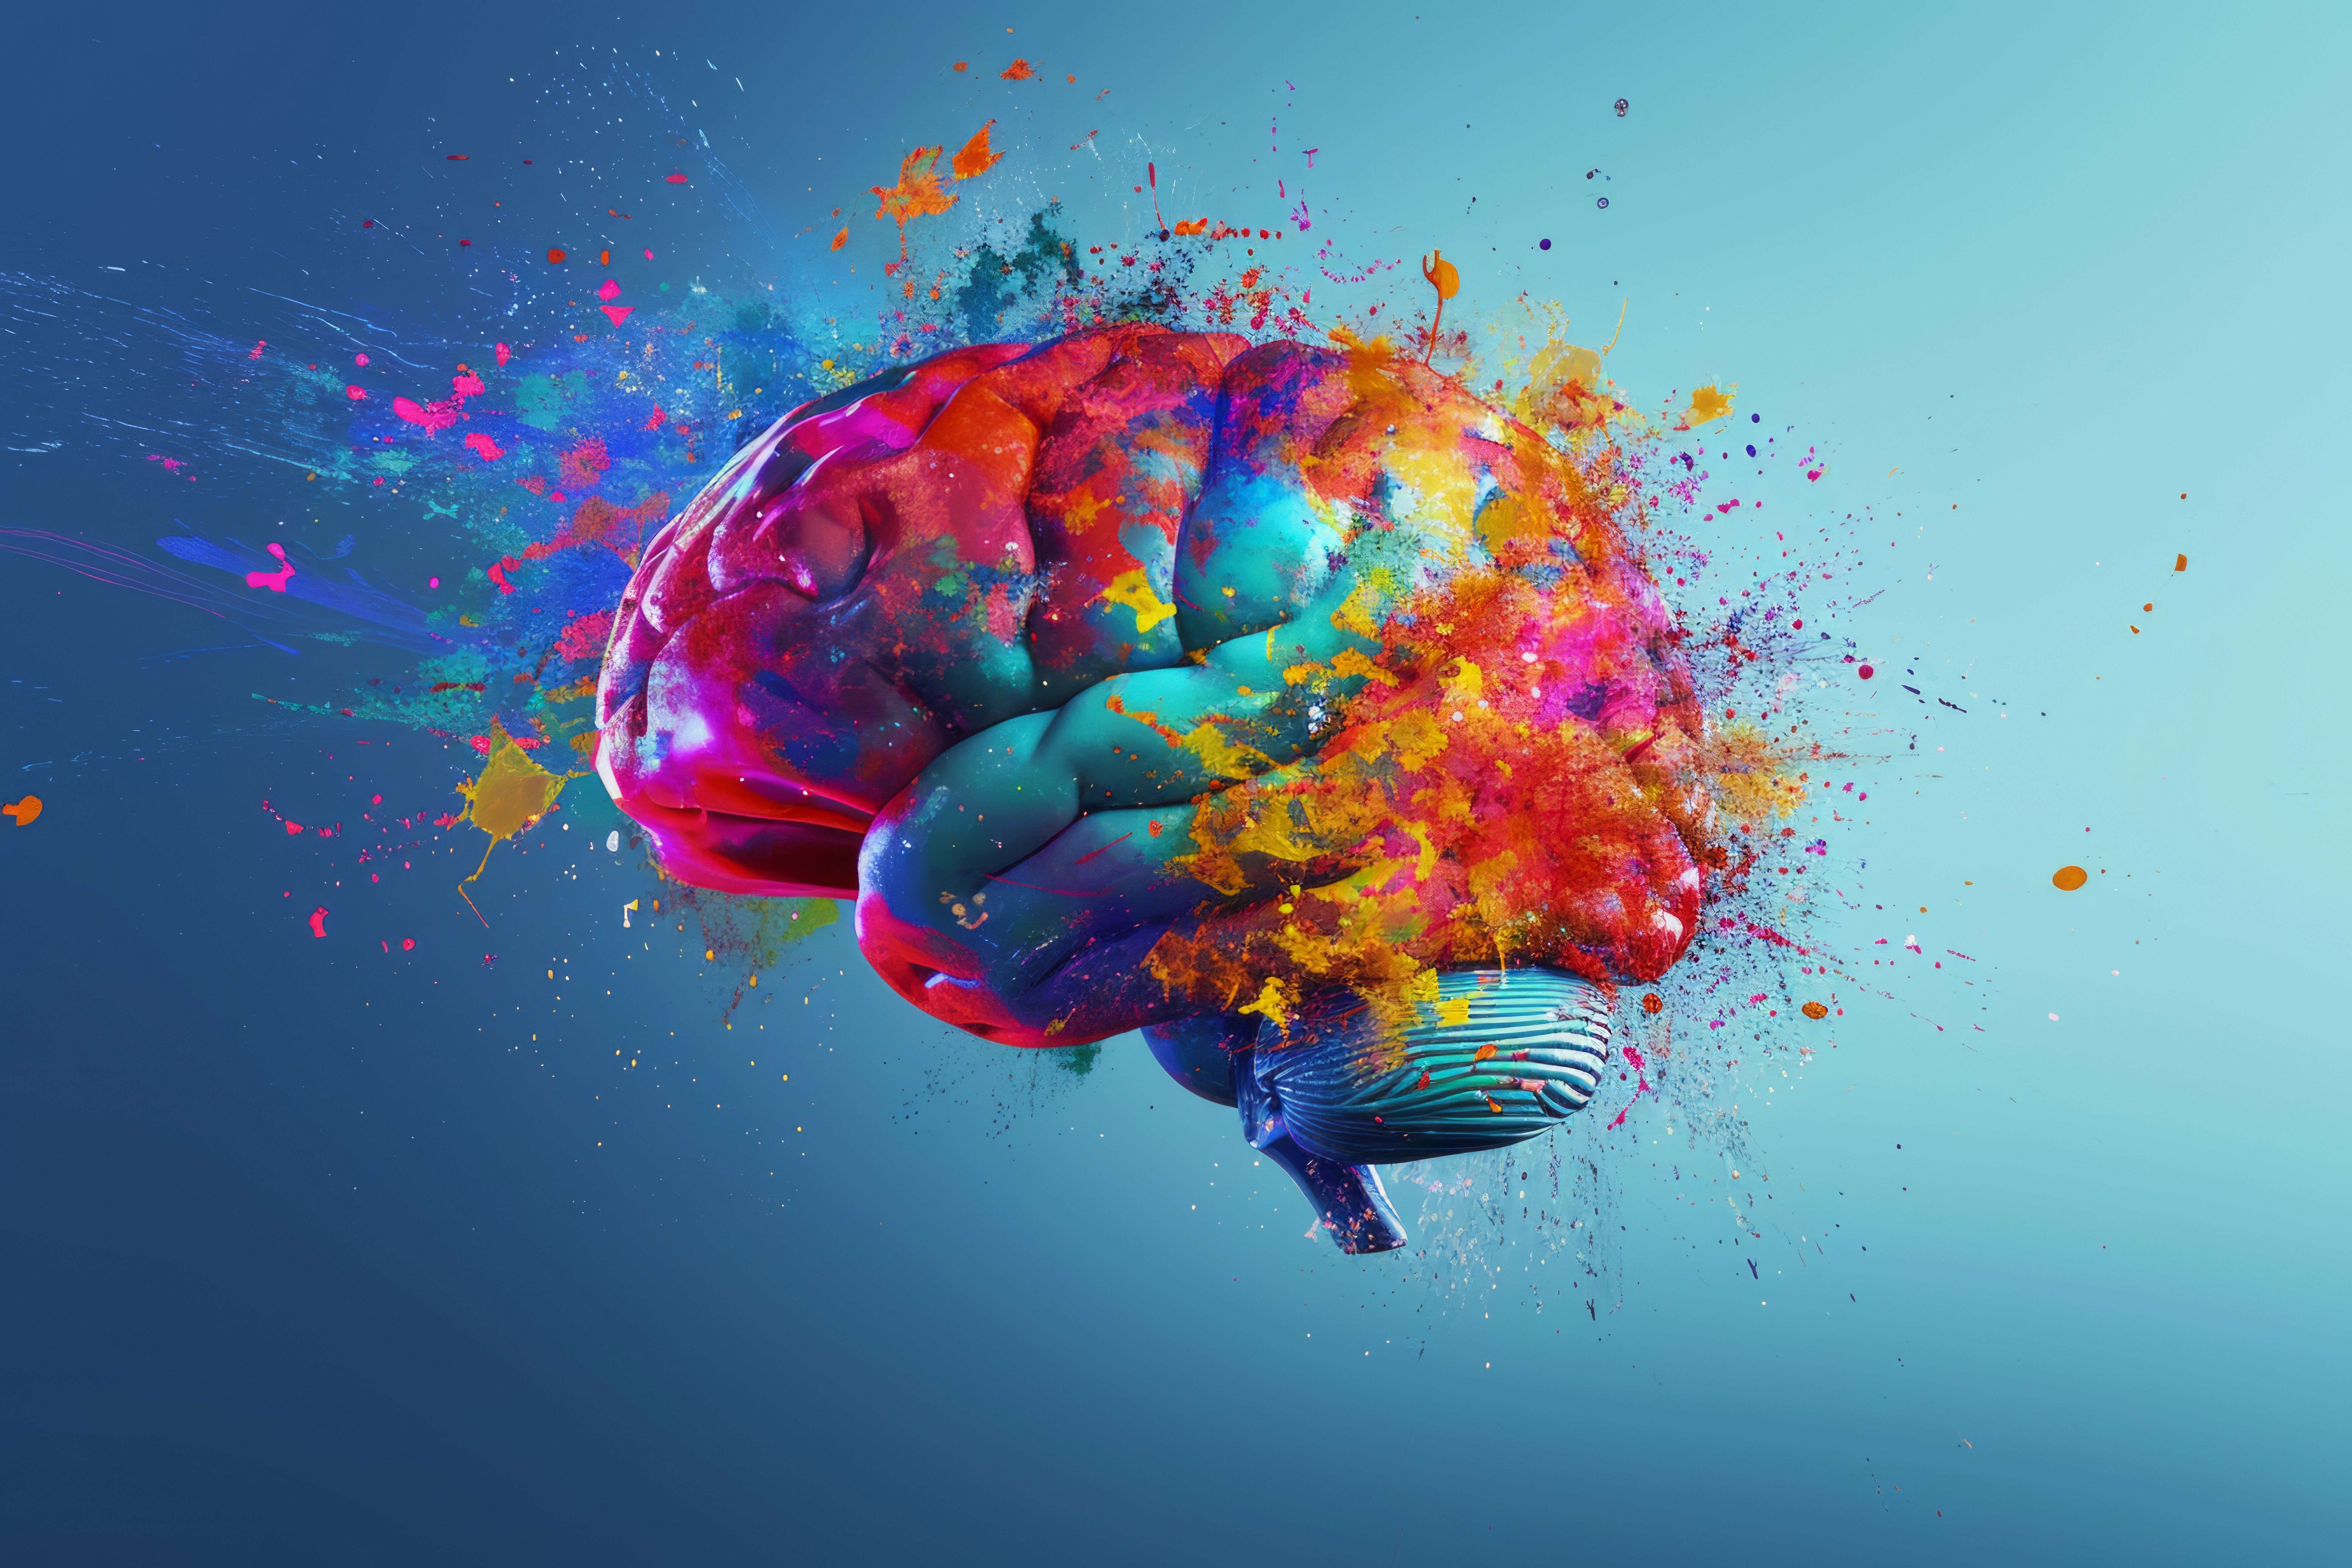 Children and adults with SCD can exhibit various cognitive deficits or neurological injury that could be related to their disease | image credit: Werckmeister - stock.adobe.com